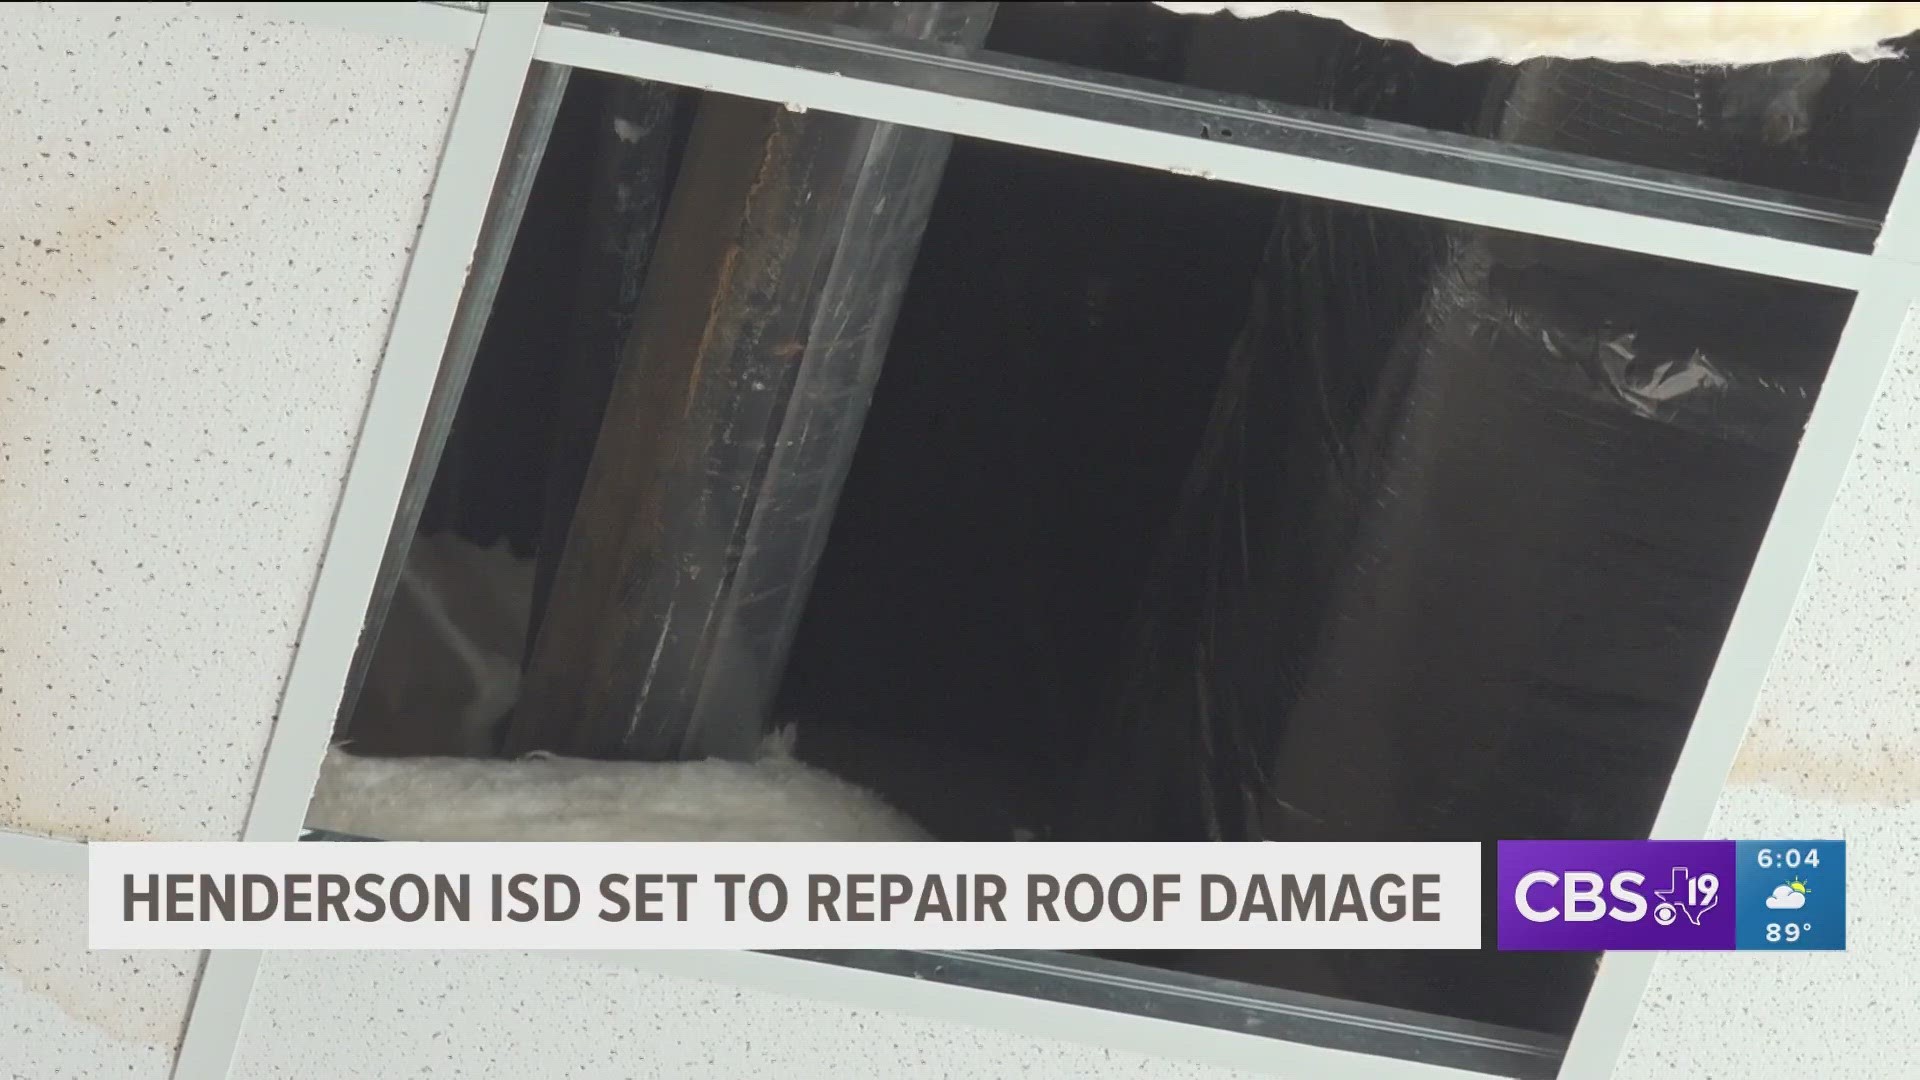 Henderson ISD approves funding to repair roof damage from hail storm at campuses